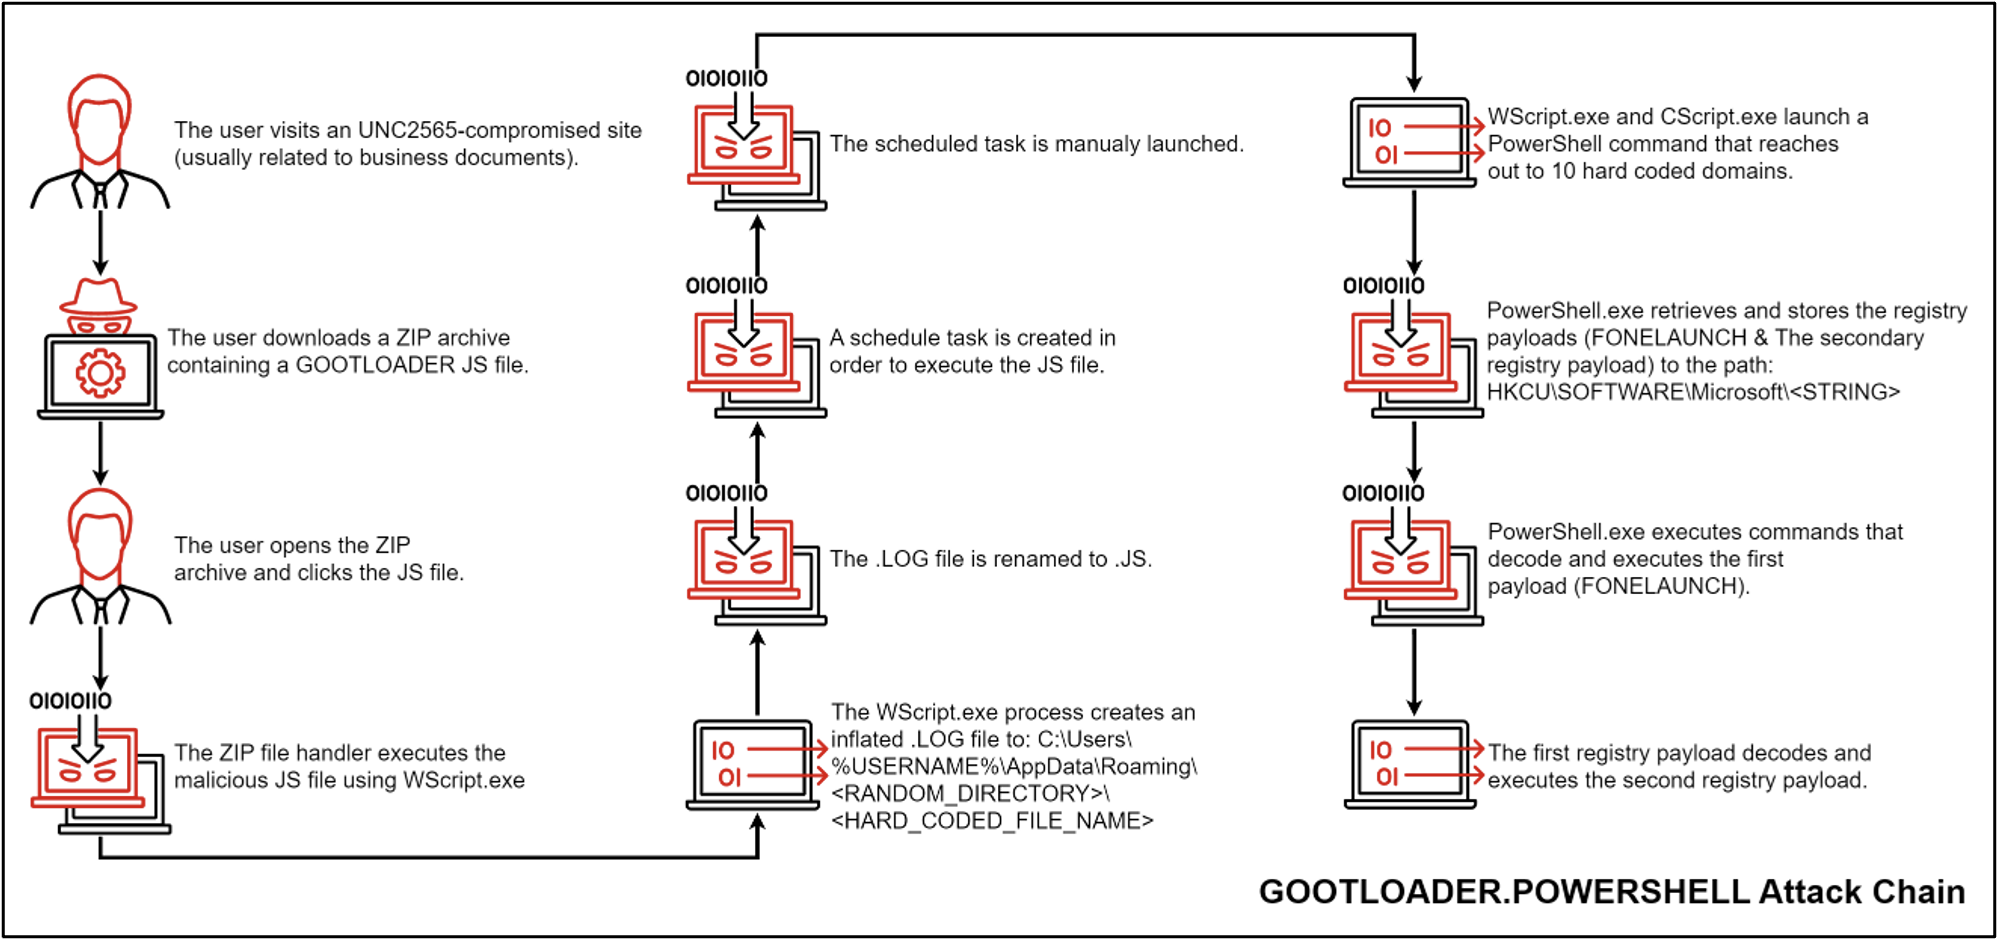 UNC2565 threat actors continue to improve the GOOTLOADER malware